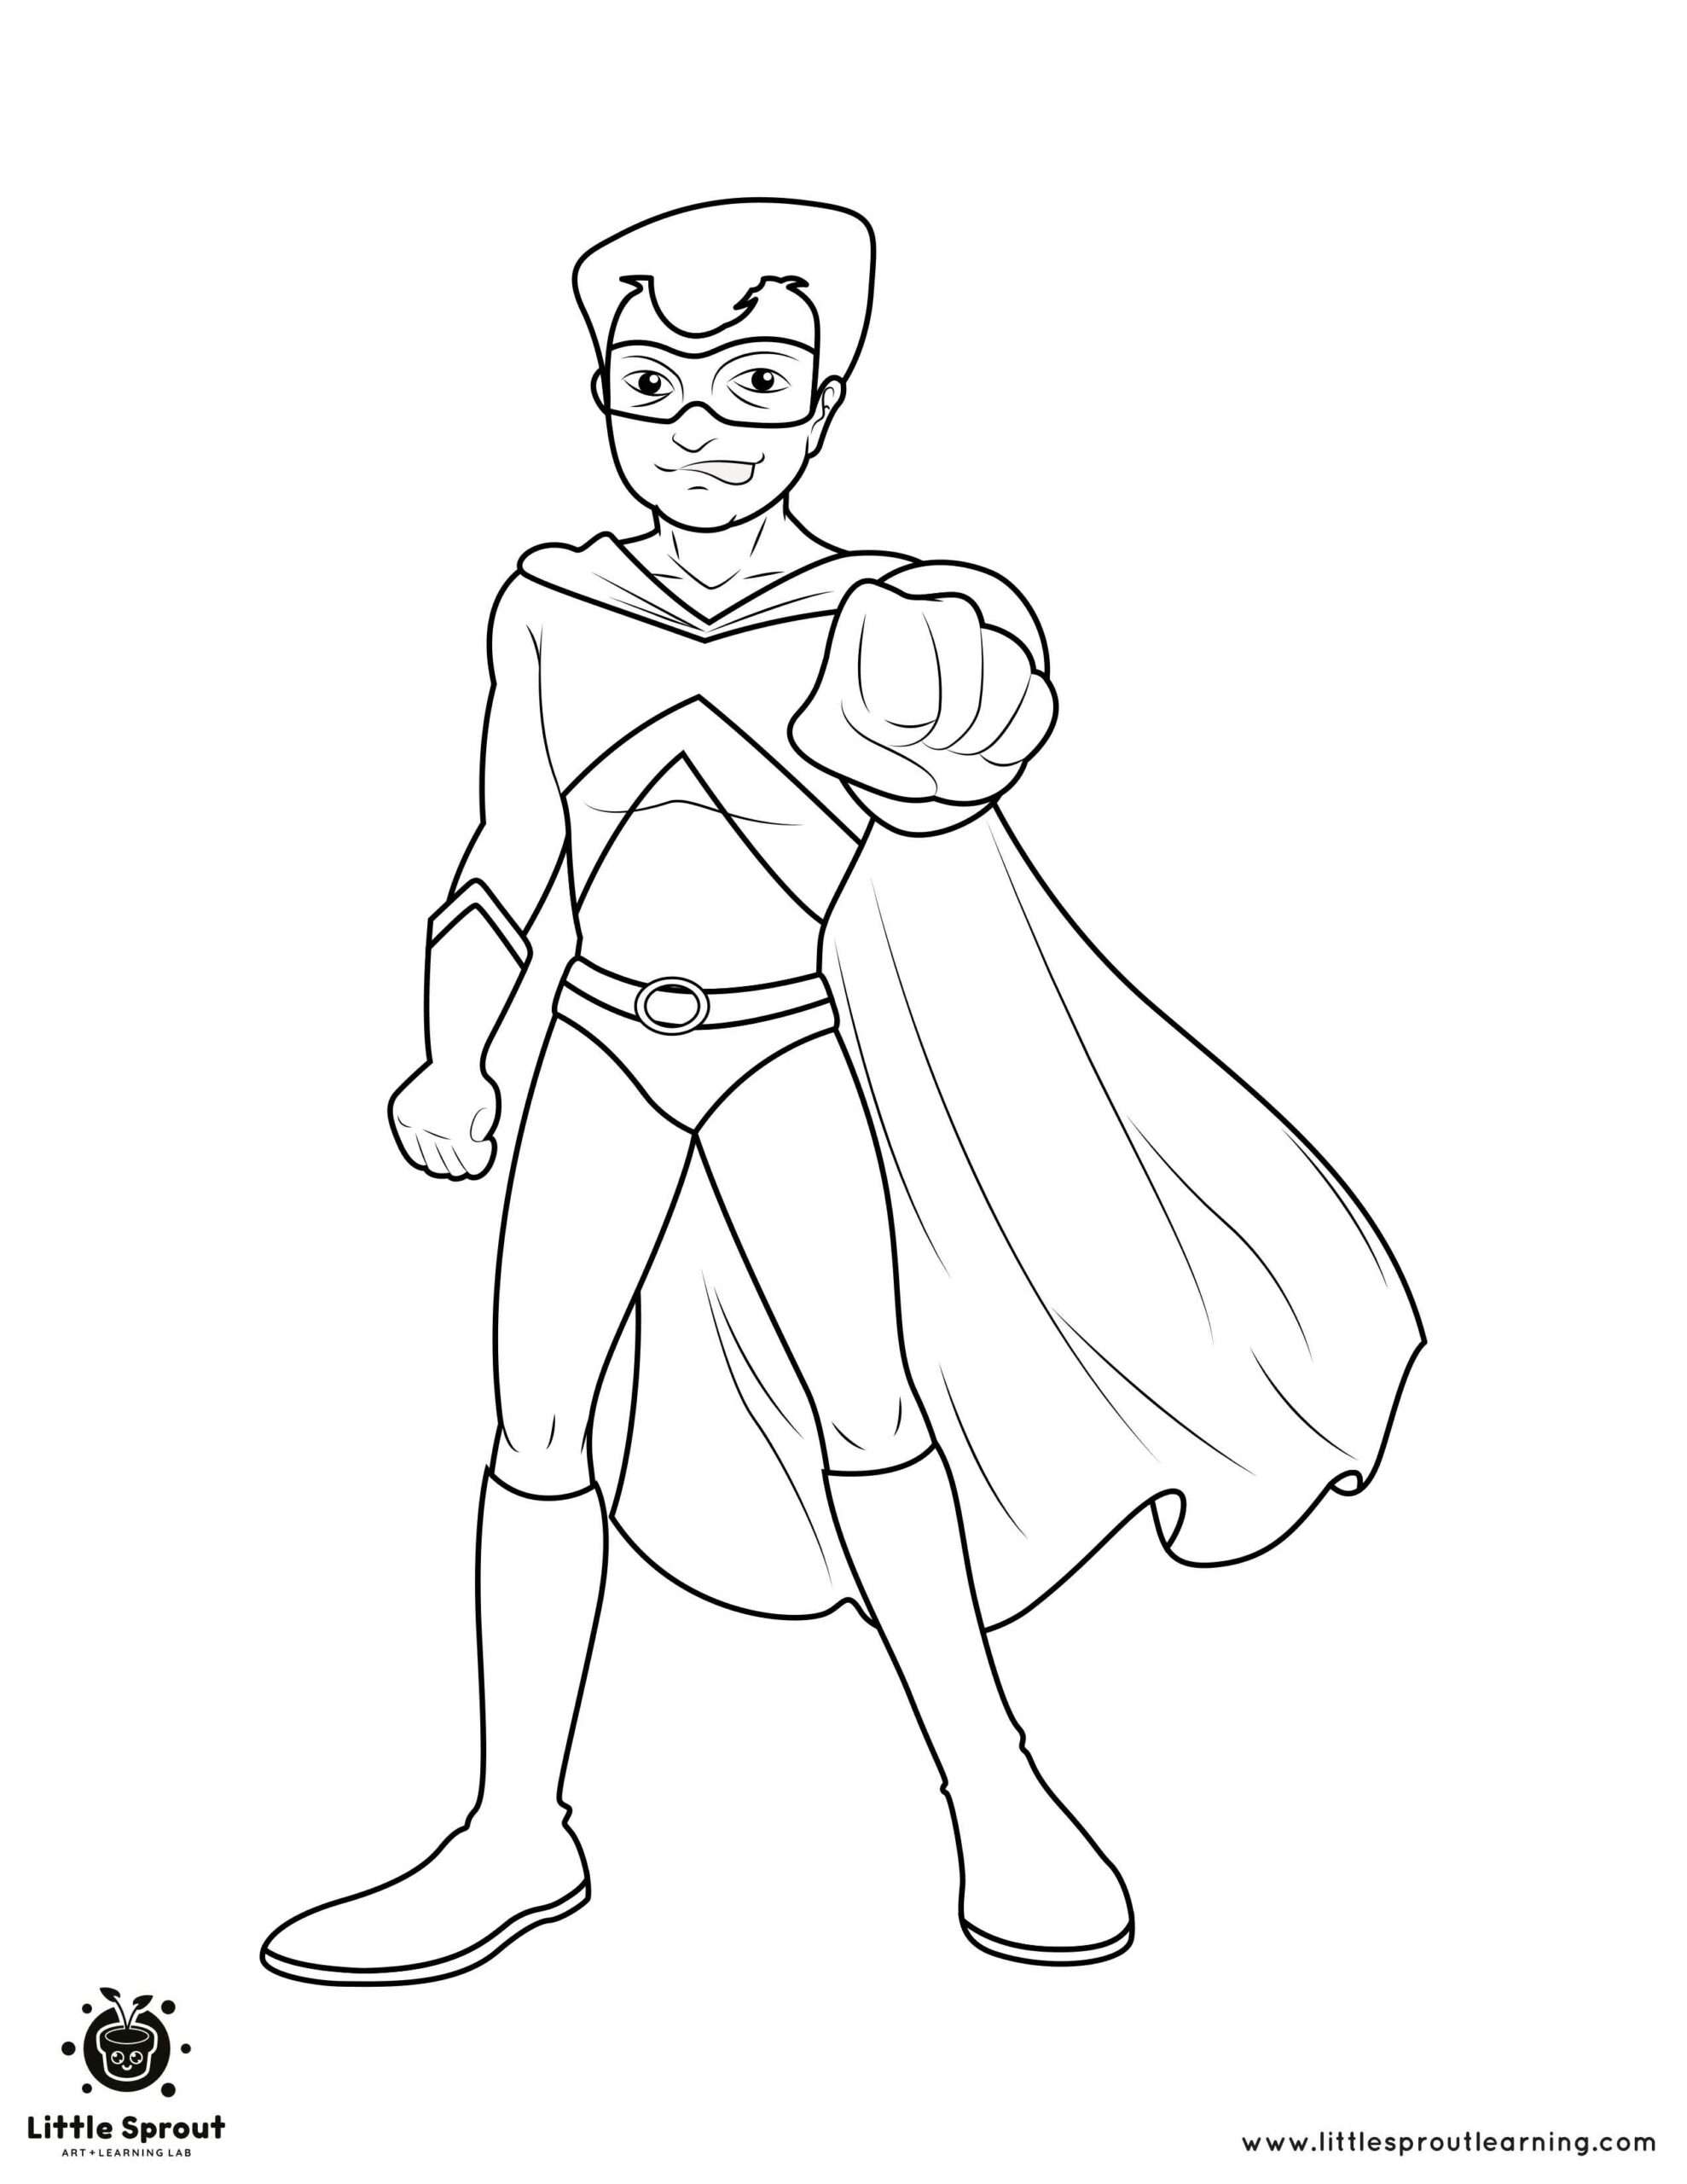 Coloring Page Superhero 1 Little Sprout Learning scaled